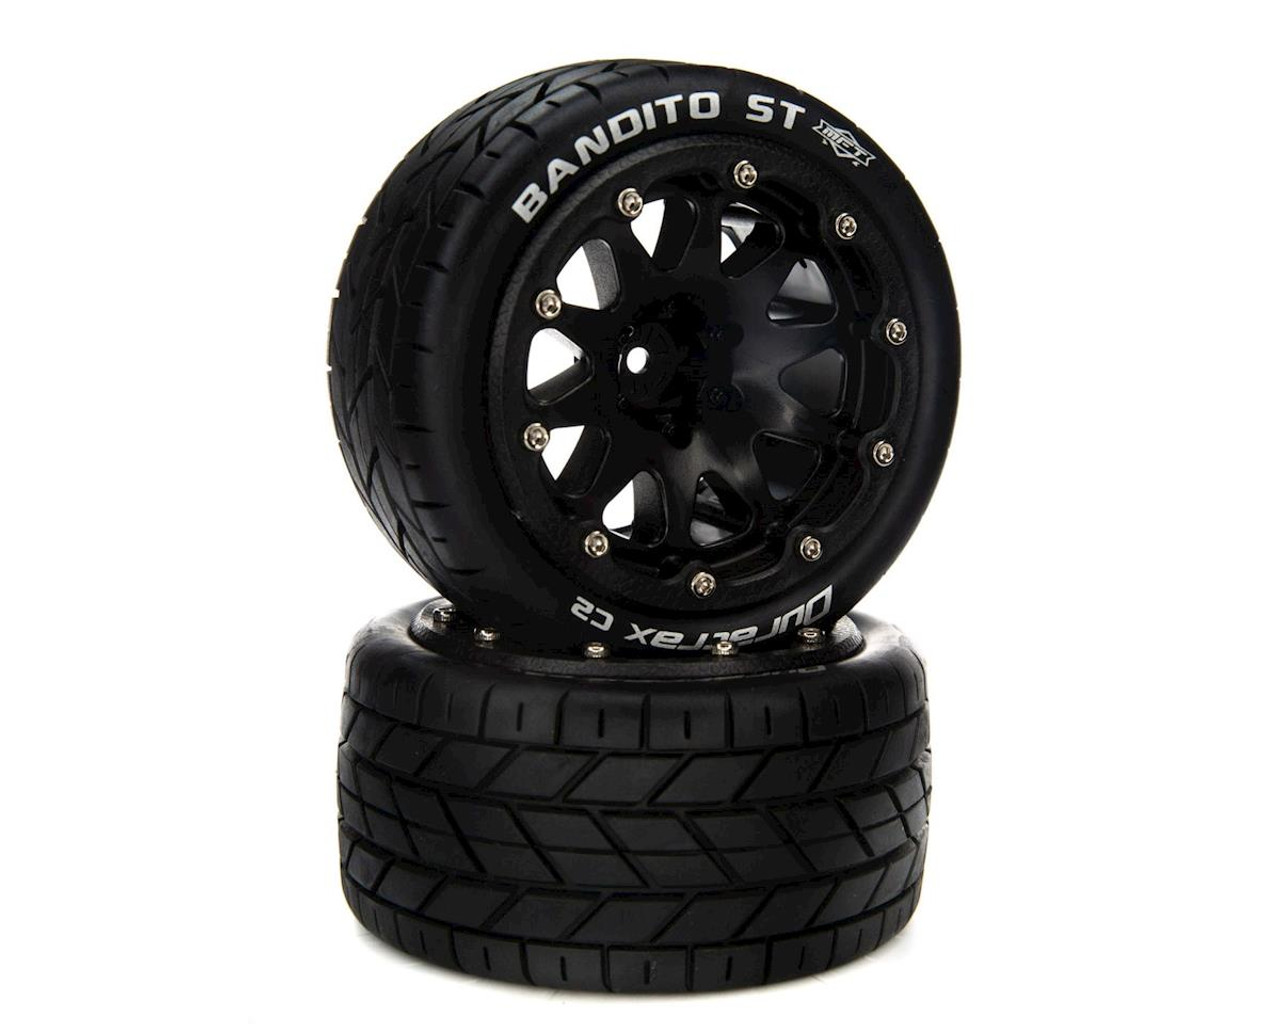 Duratrax 5540 Bandito ST Belted 2.8" Mounted Front/Rear Tires, 14mm Black (2)